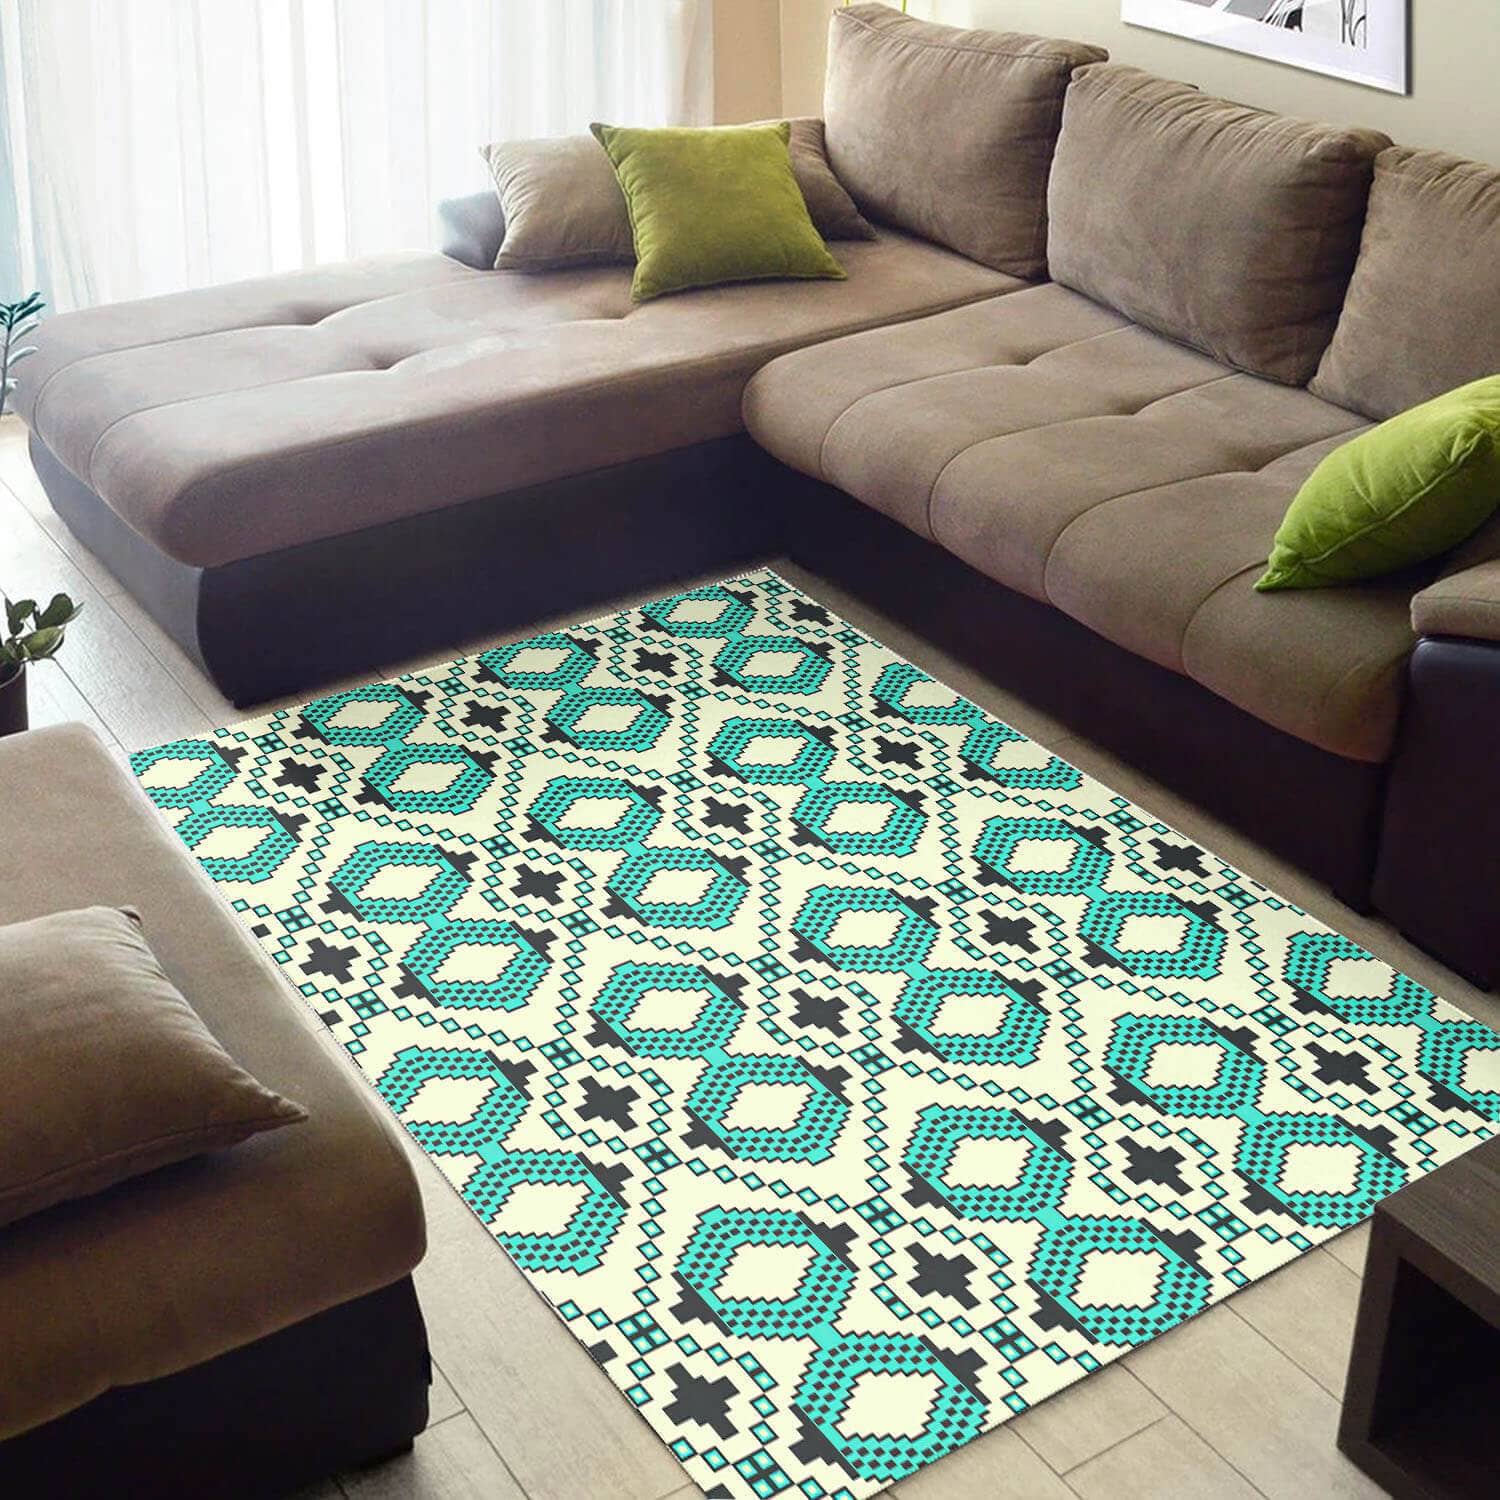 Cool African Style Unique Inspired Ethnic Seamless Pattern Carpet Living Room Rug